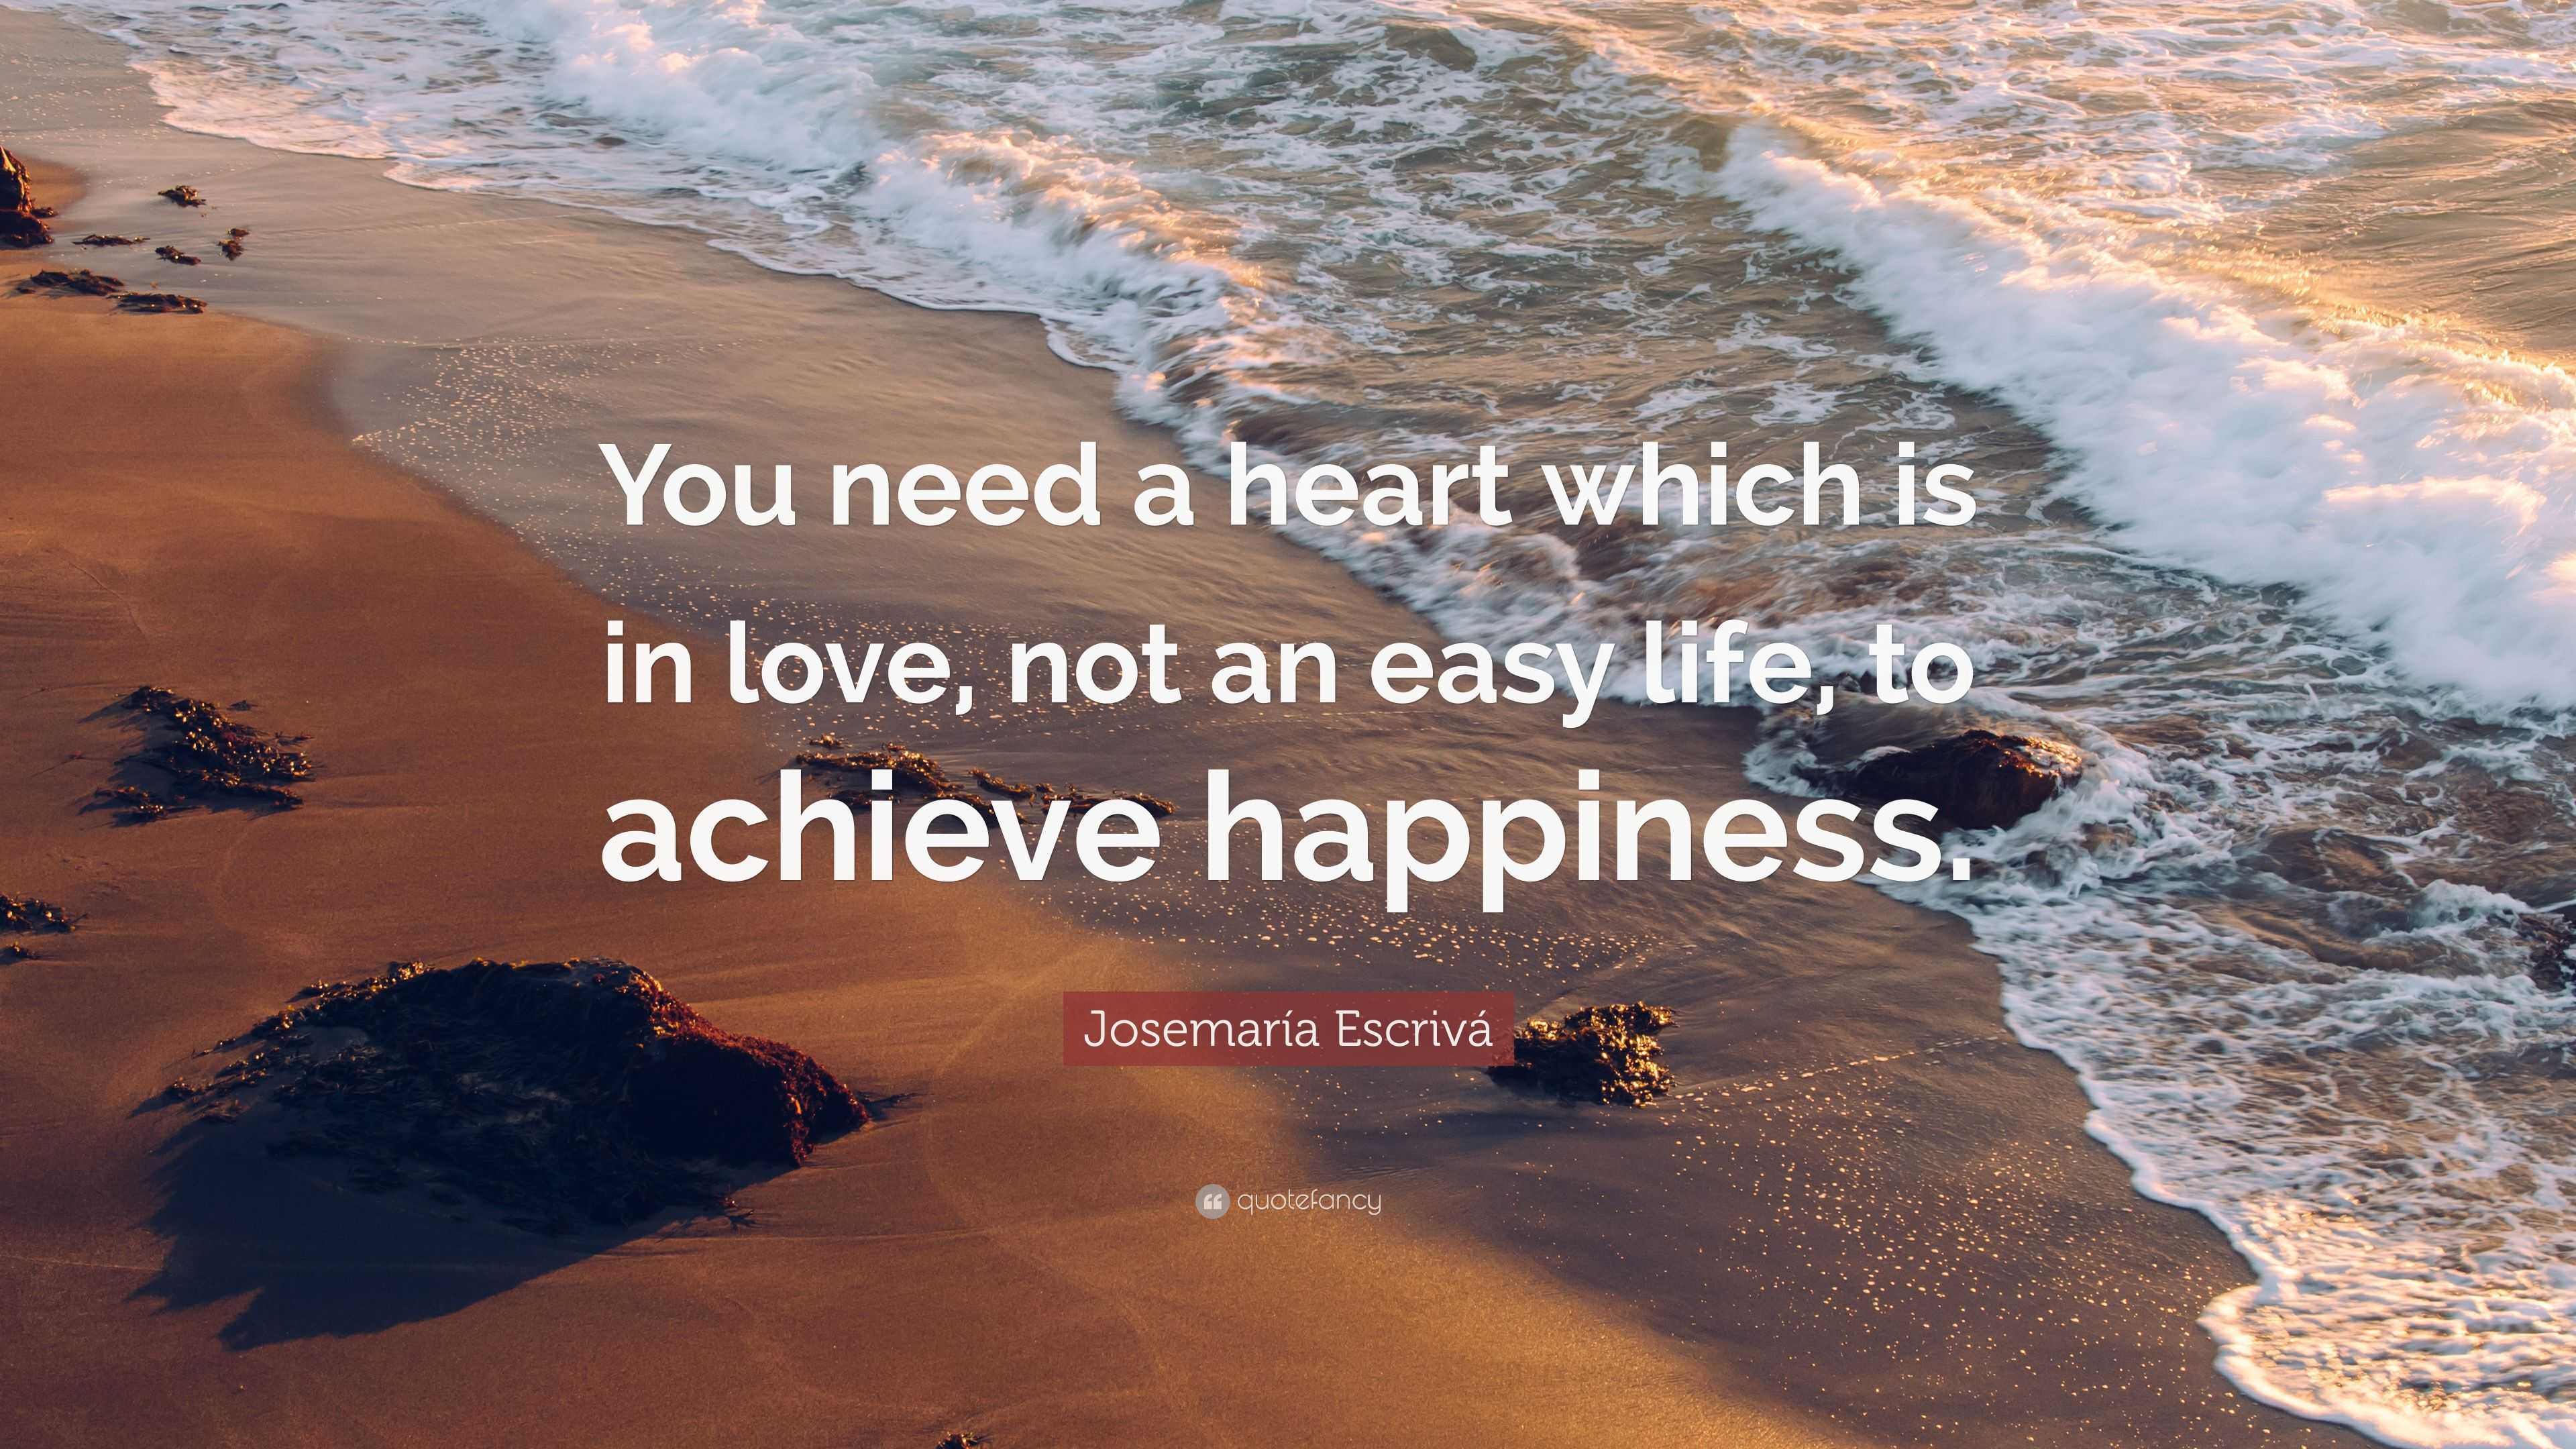 Josemaría Escrivá Quote: “You need a heart which is in love, not an ...